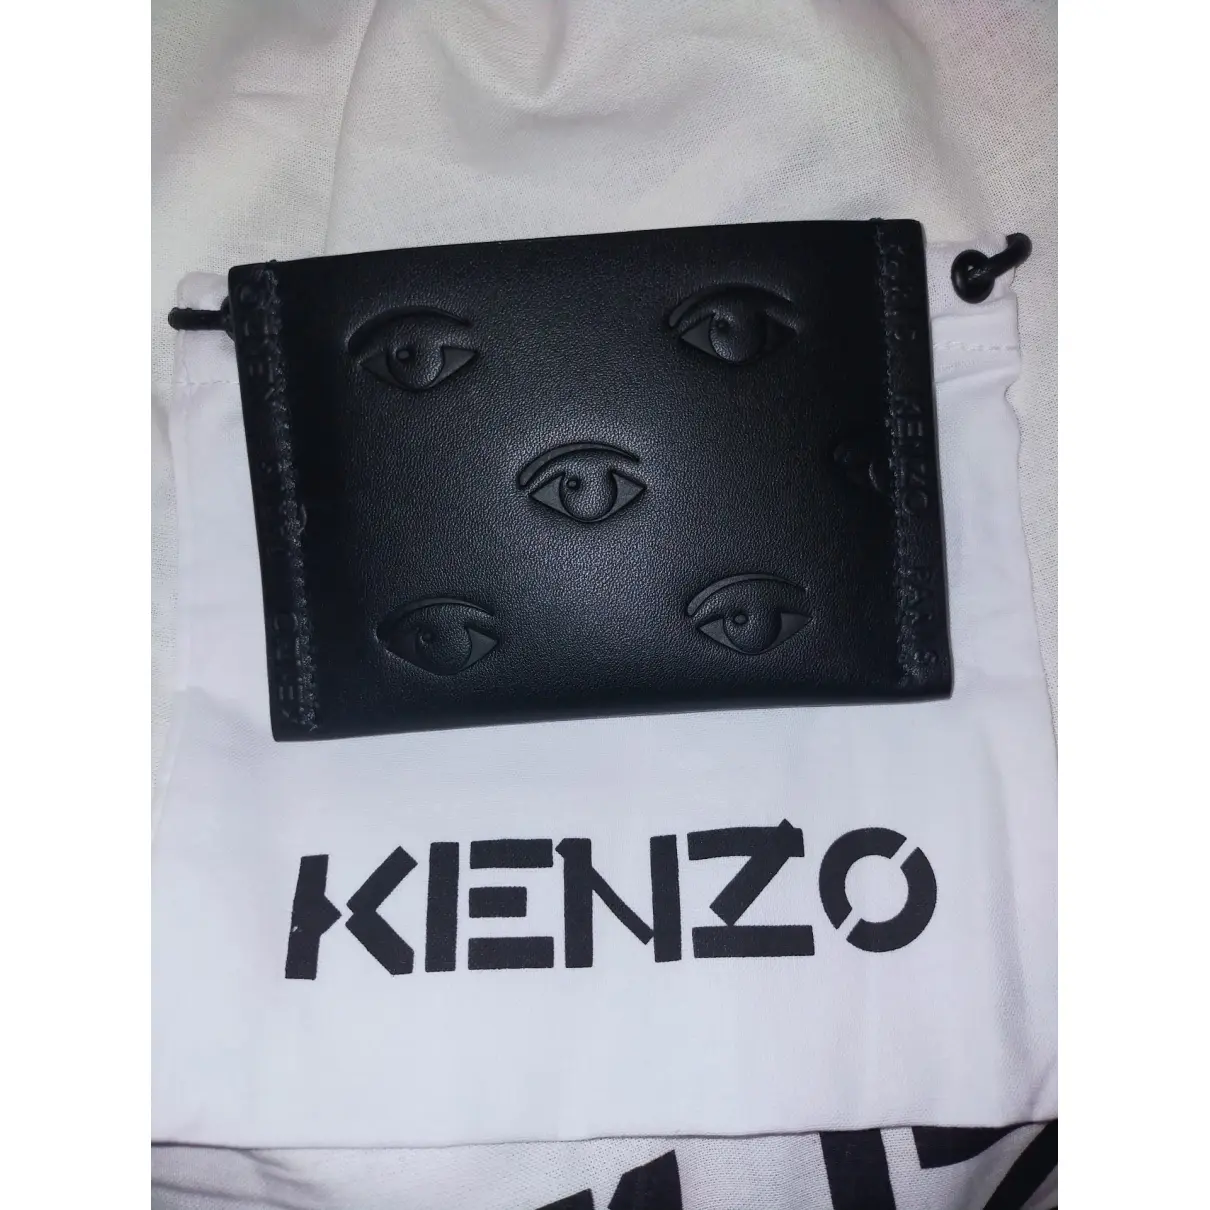 Buy Kenzo Leather small bag online